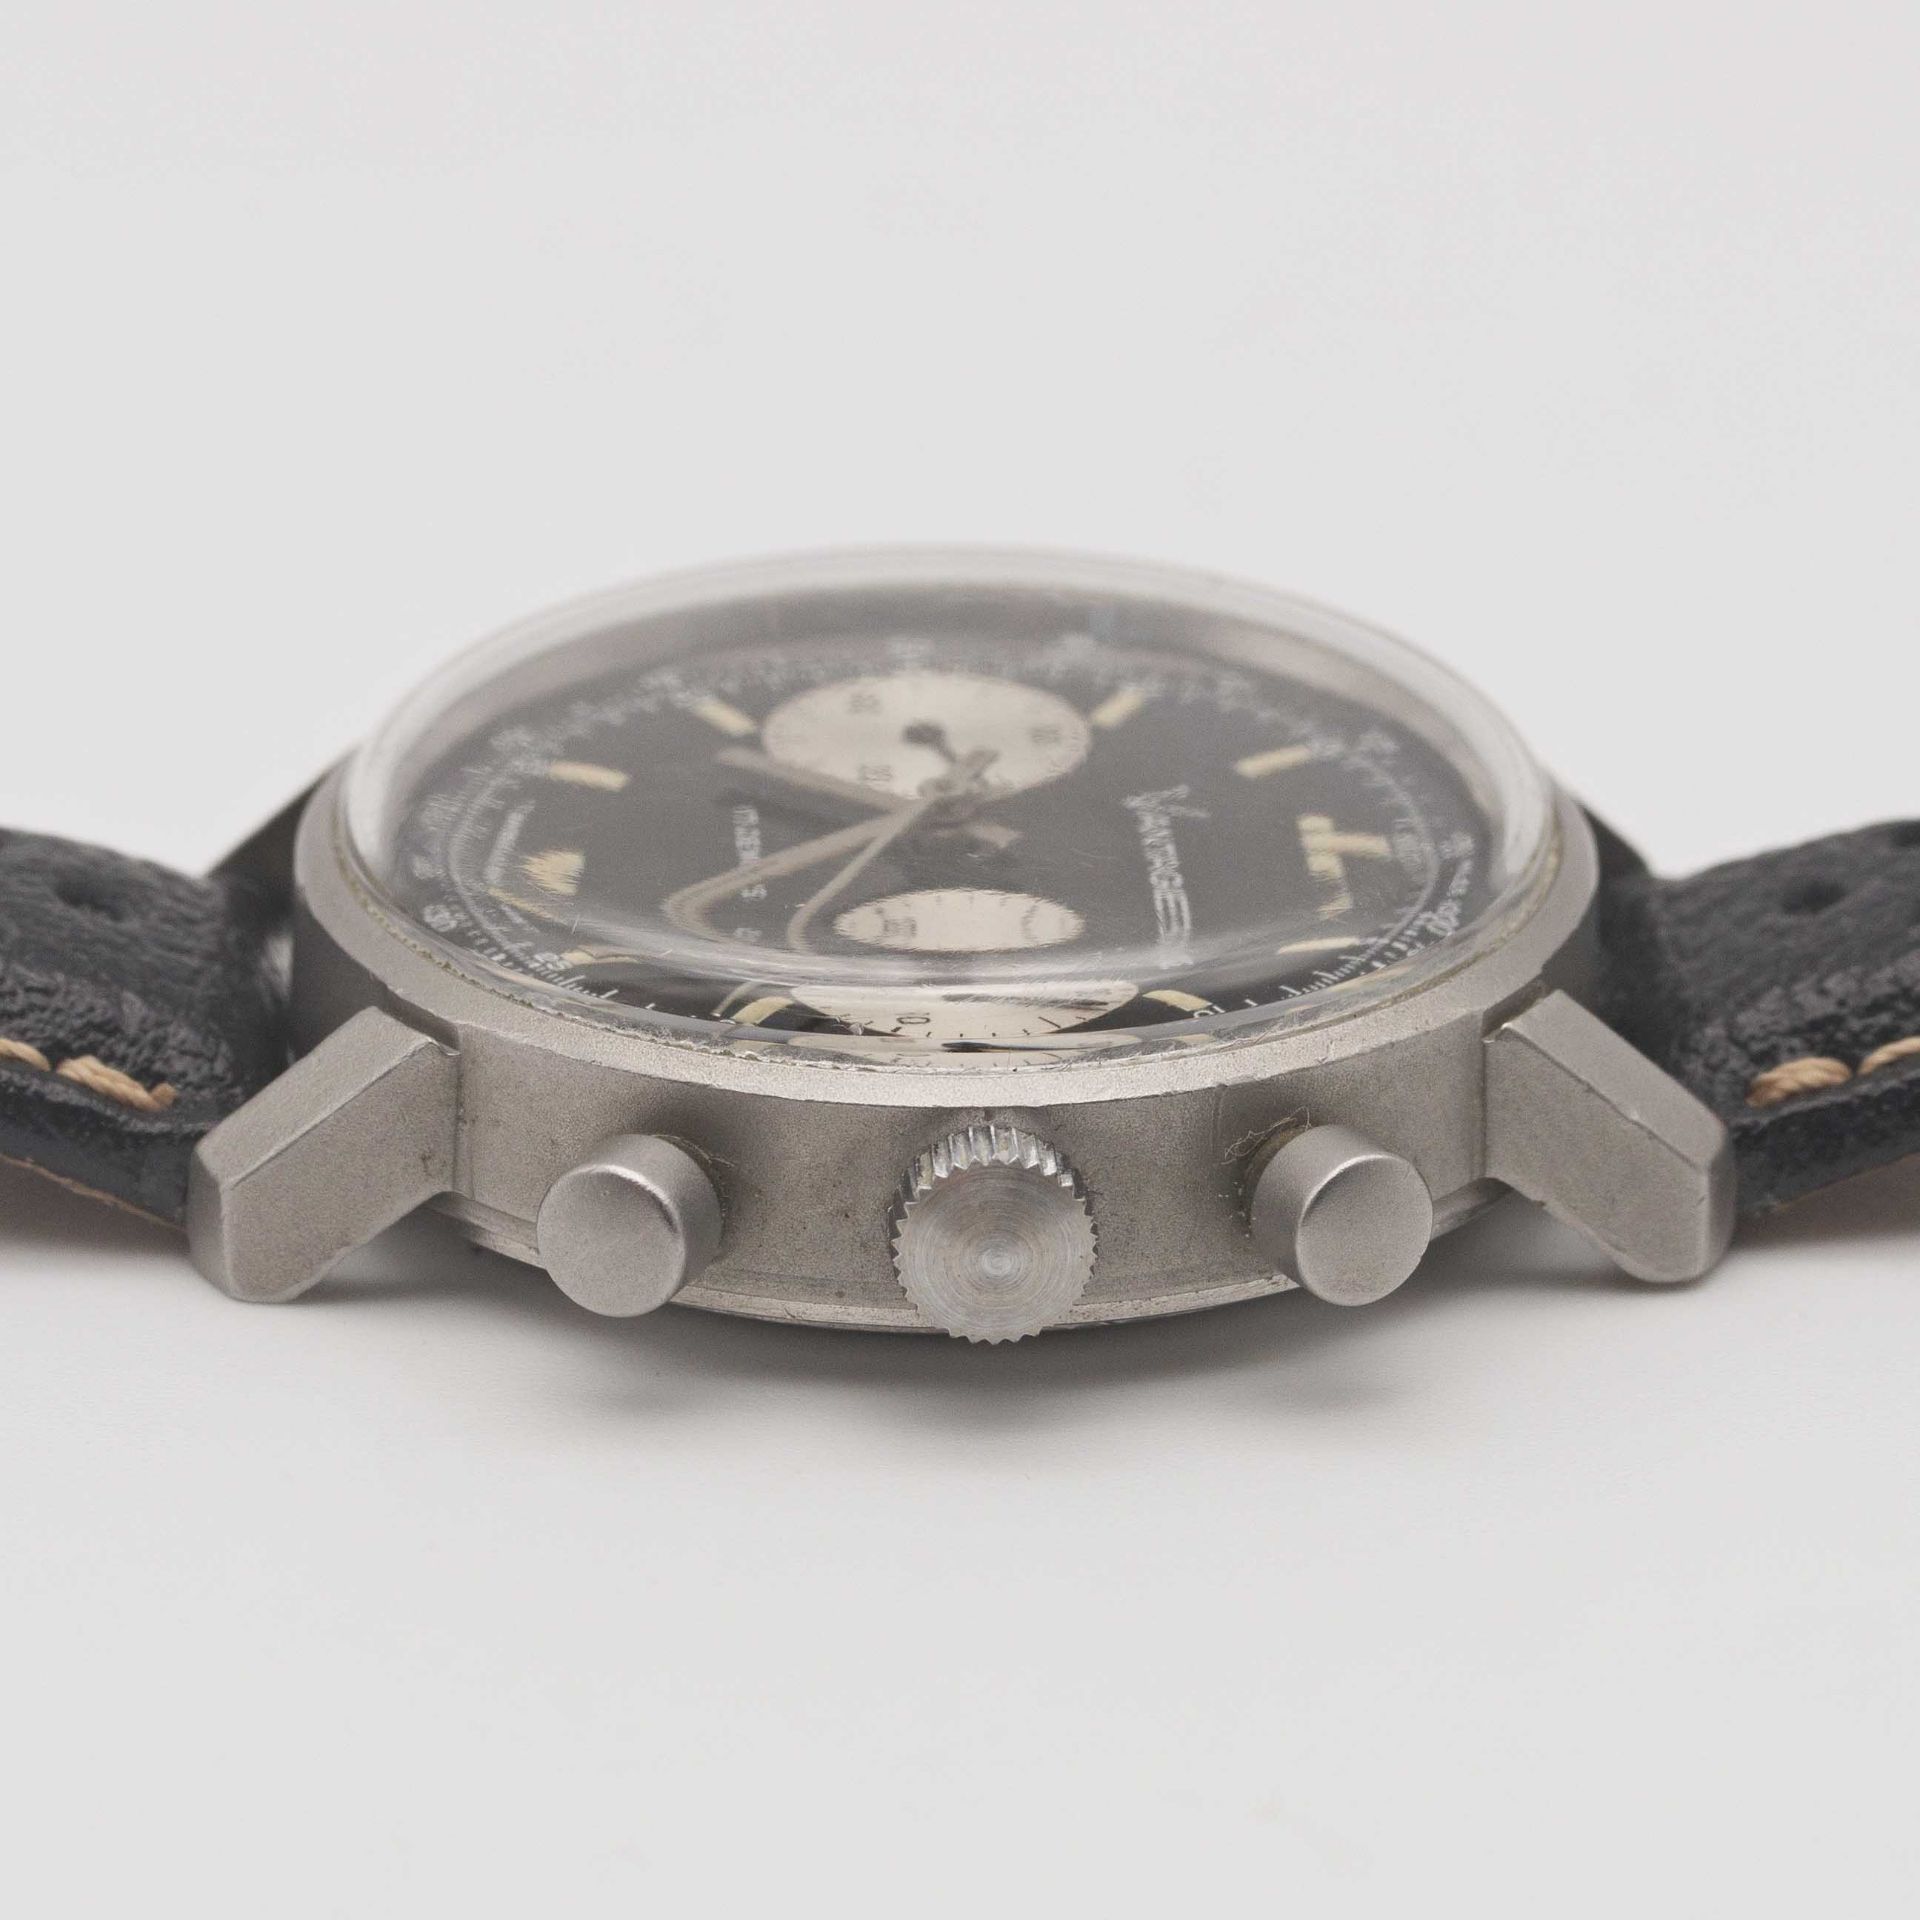 A GENTLEMAN'S STAINLESS STEEL VANTAGE CHRONOGRAPH WRIST WATCH CIRCA 1970, WITH GLOSS BLACK DIAL - Image 8 of 9